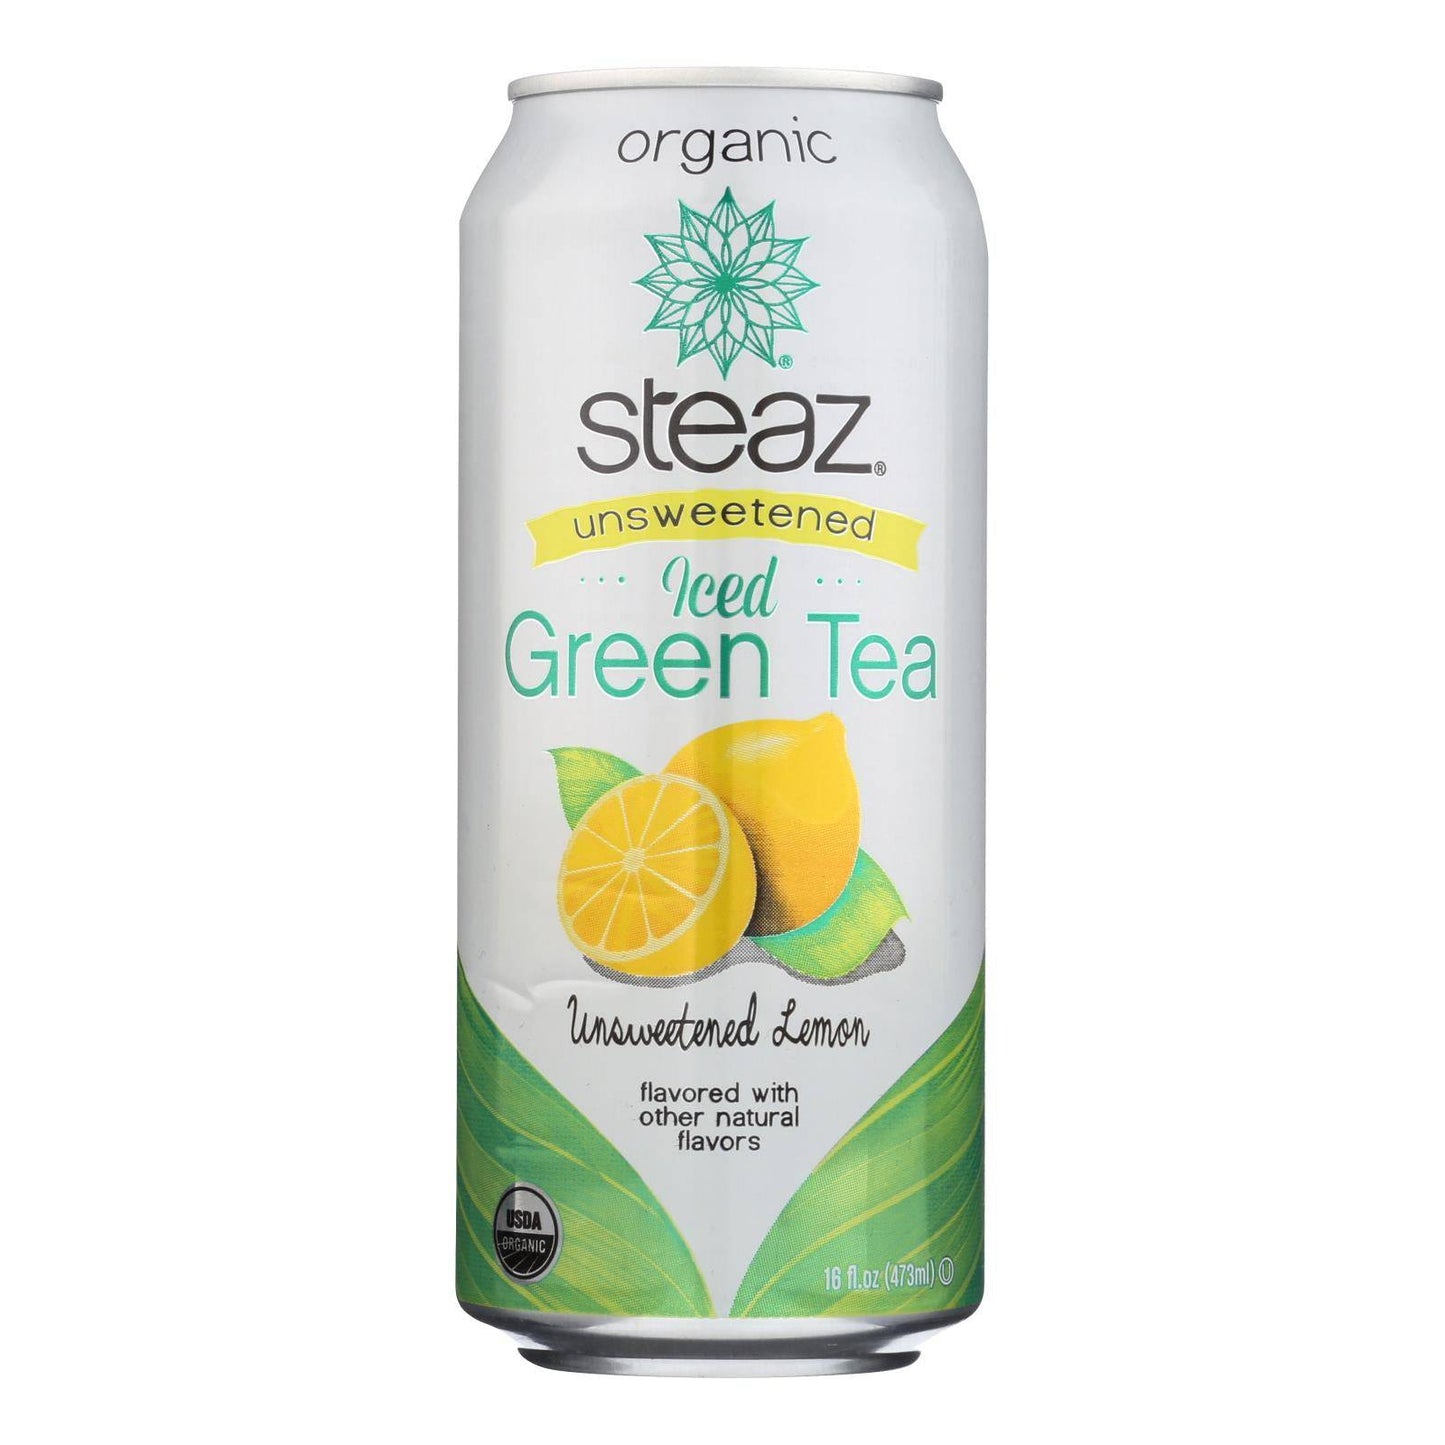 Buy Steaz Unsweetened Green Tea - Lemon - Case Of 12 - 16 Fl Oz.  at OnlyNaturals.us